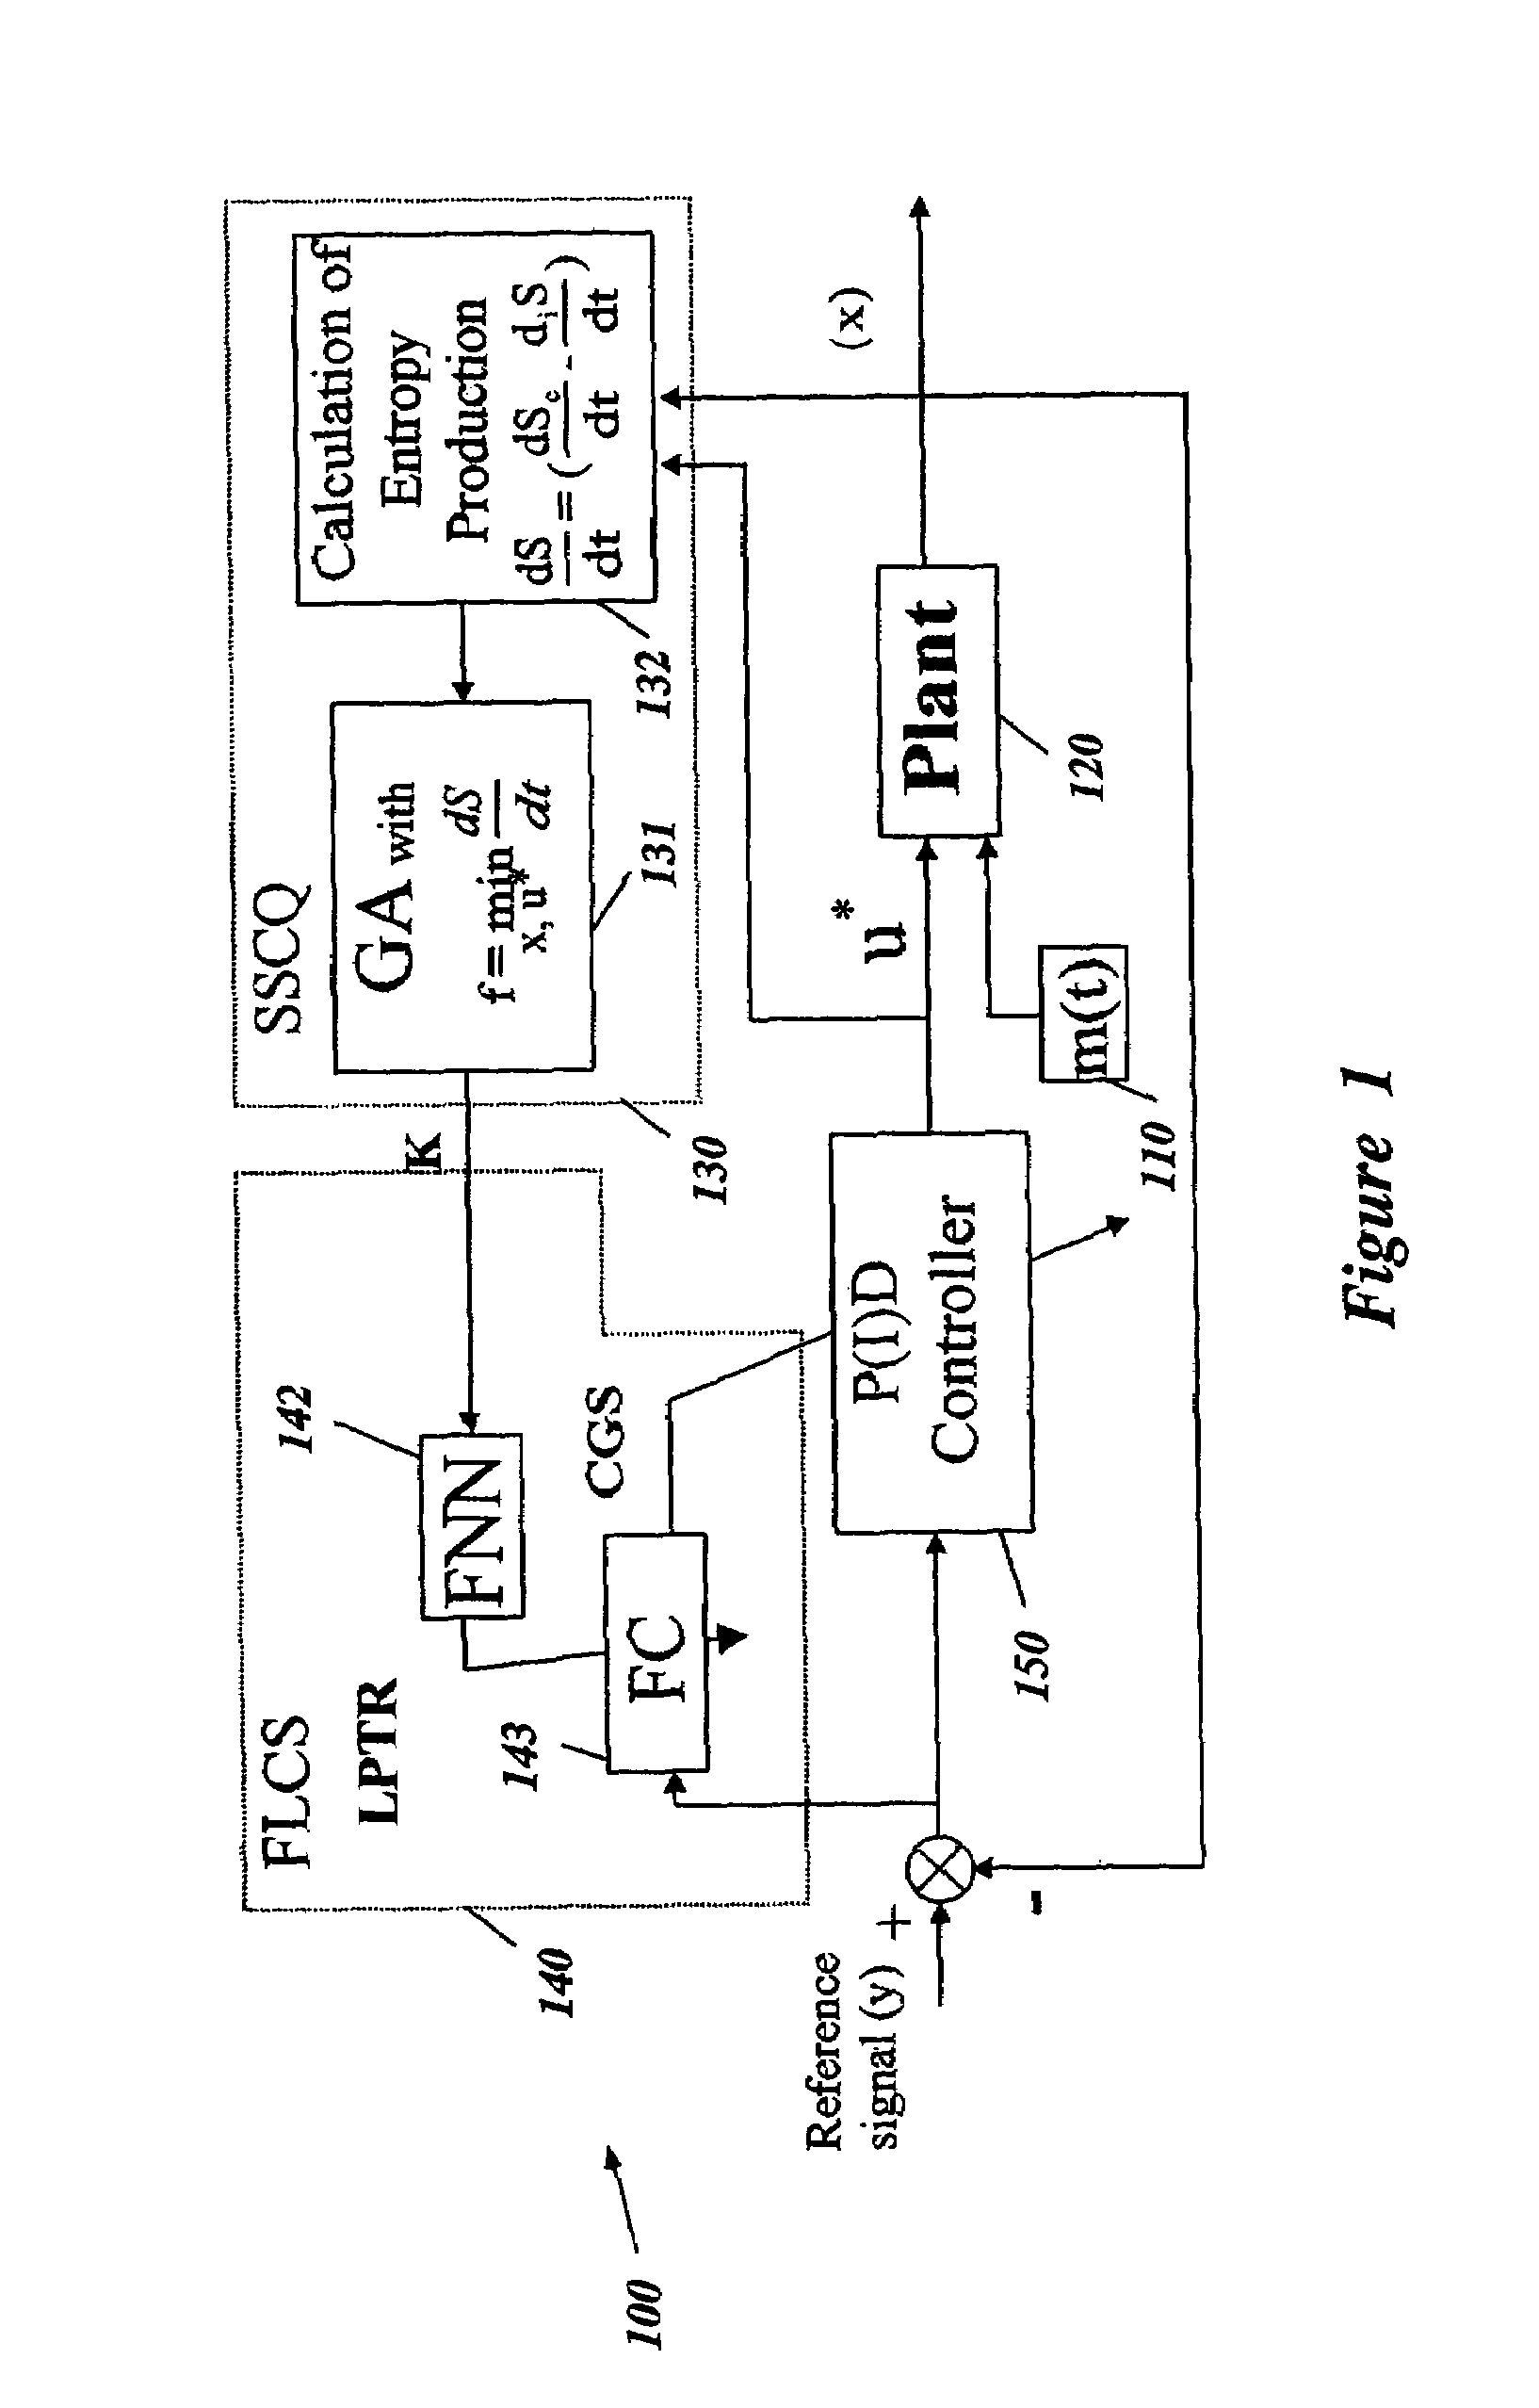 Soft computing optimizer of intelligent control system structures